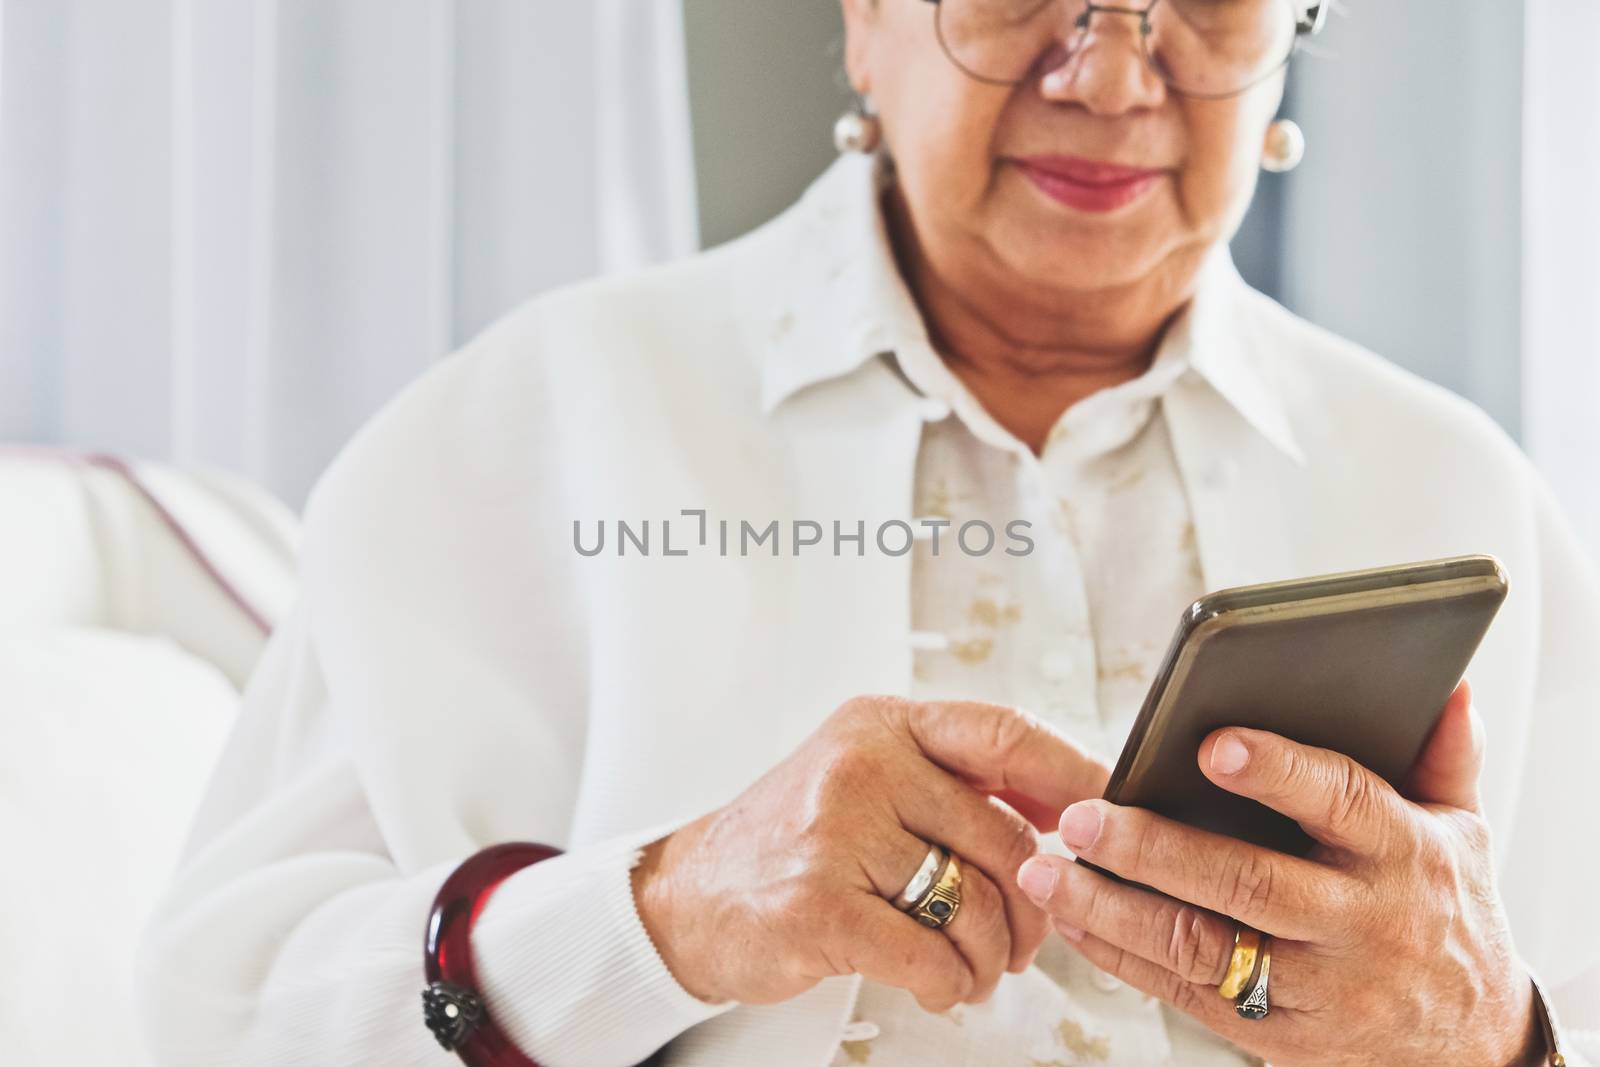 close up image of Senior woman using her mobile phone background.  An idea of modern lifestyle, communication,telecommunication,connectivity, social networking